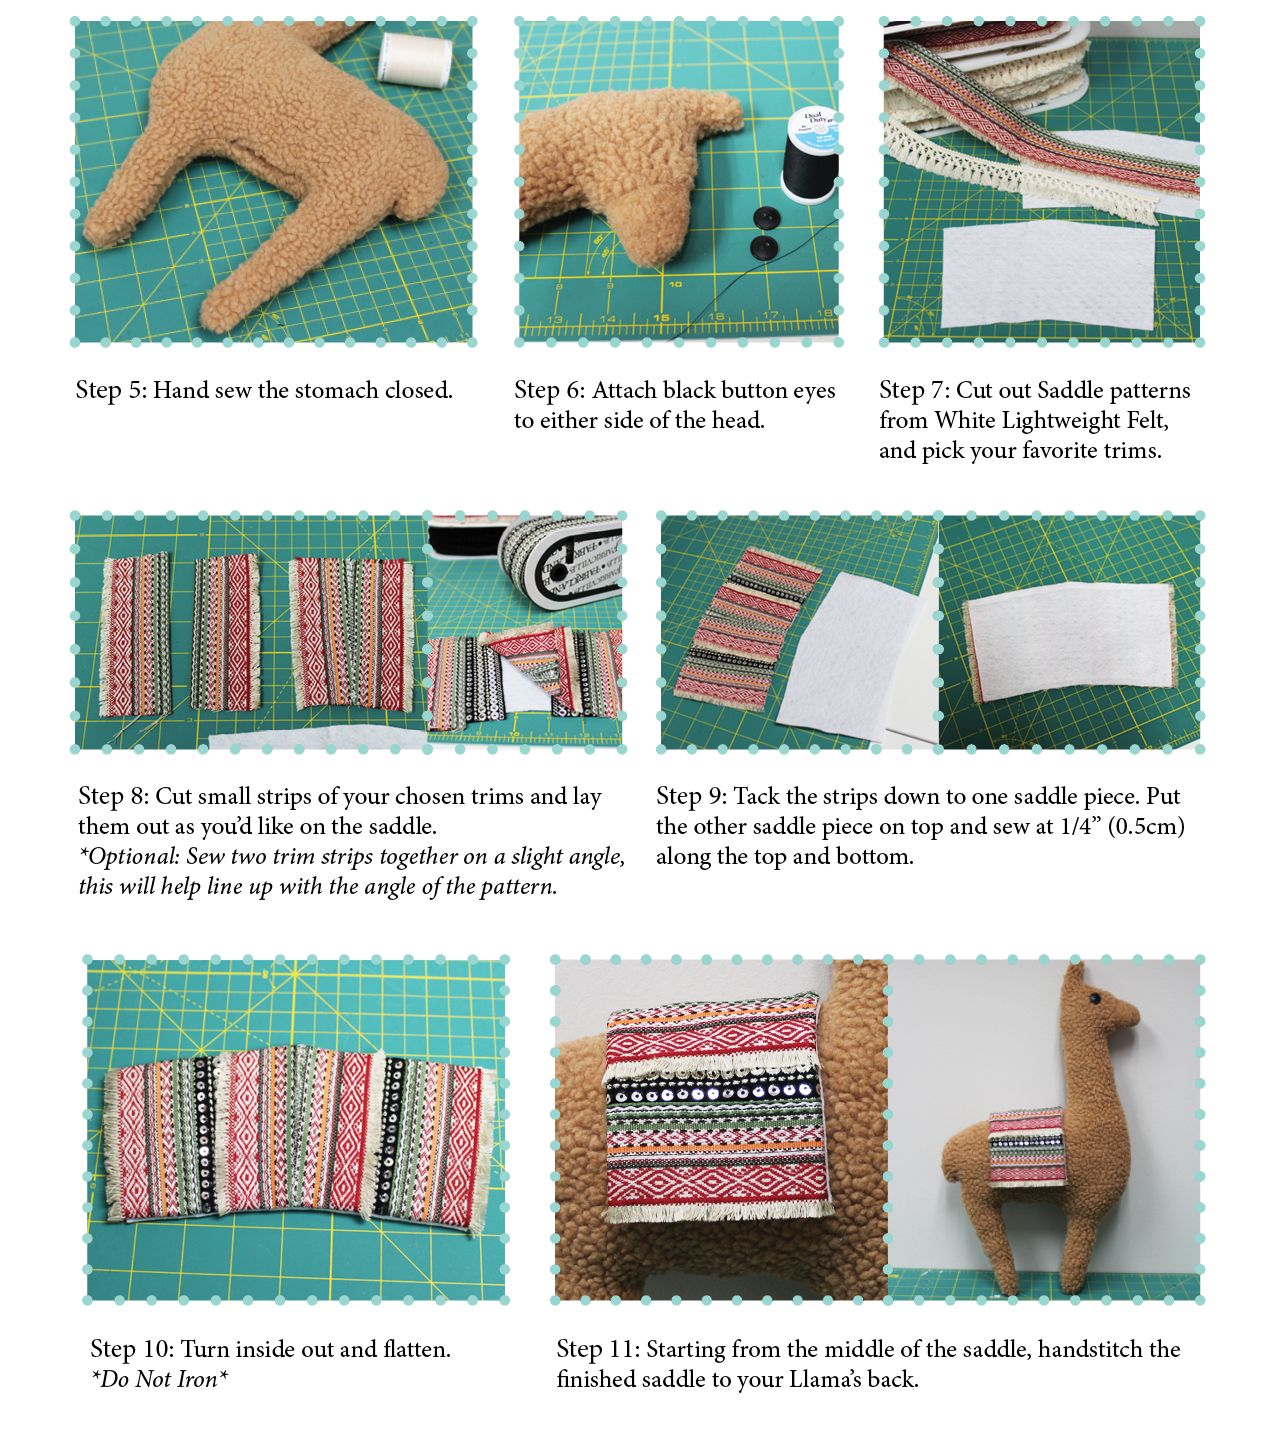 Second set of steps to creating your own Llama Pillow